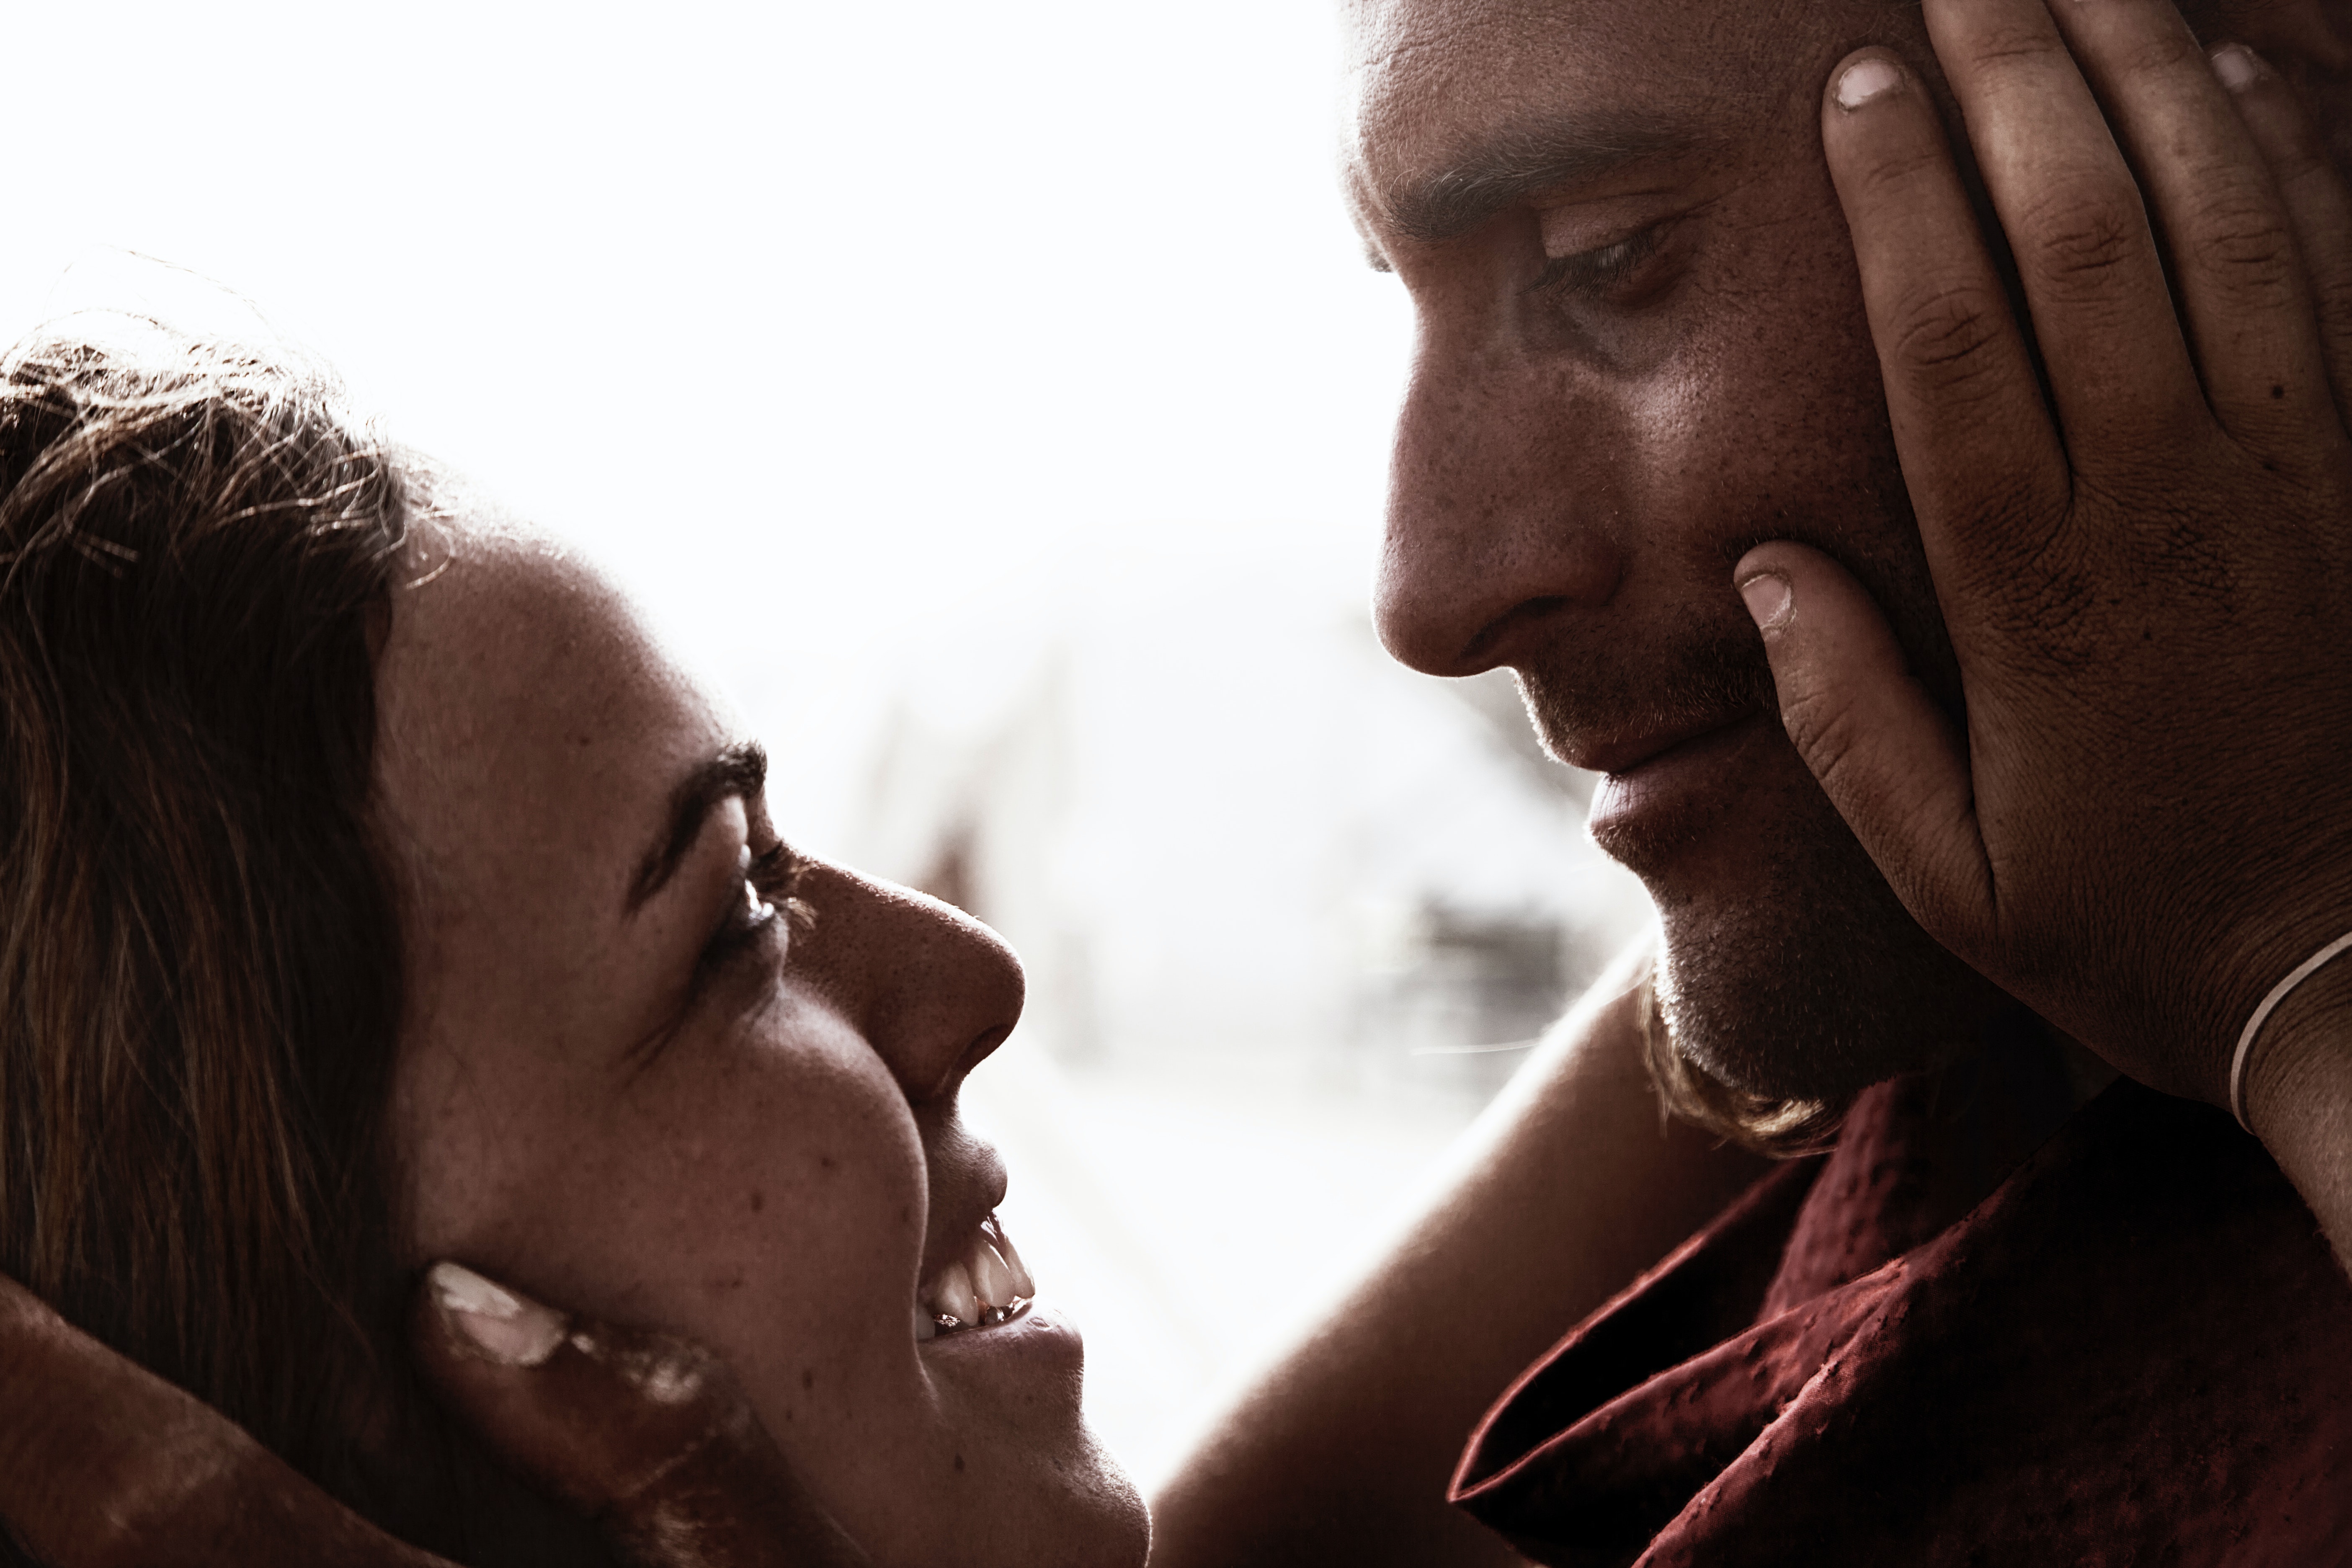 Couple looking lovingly at each other | Source: Pexels